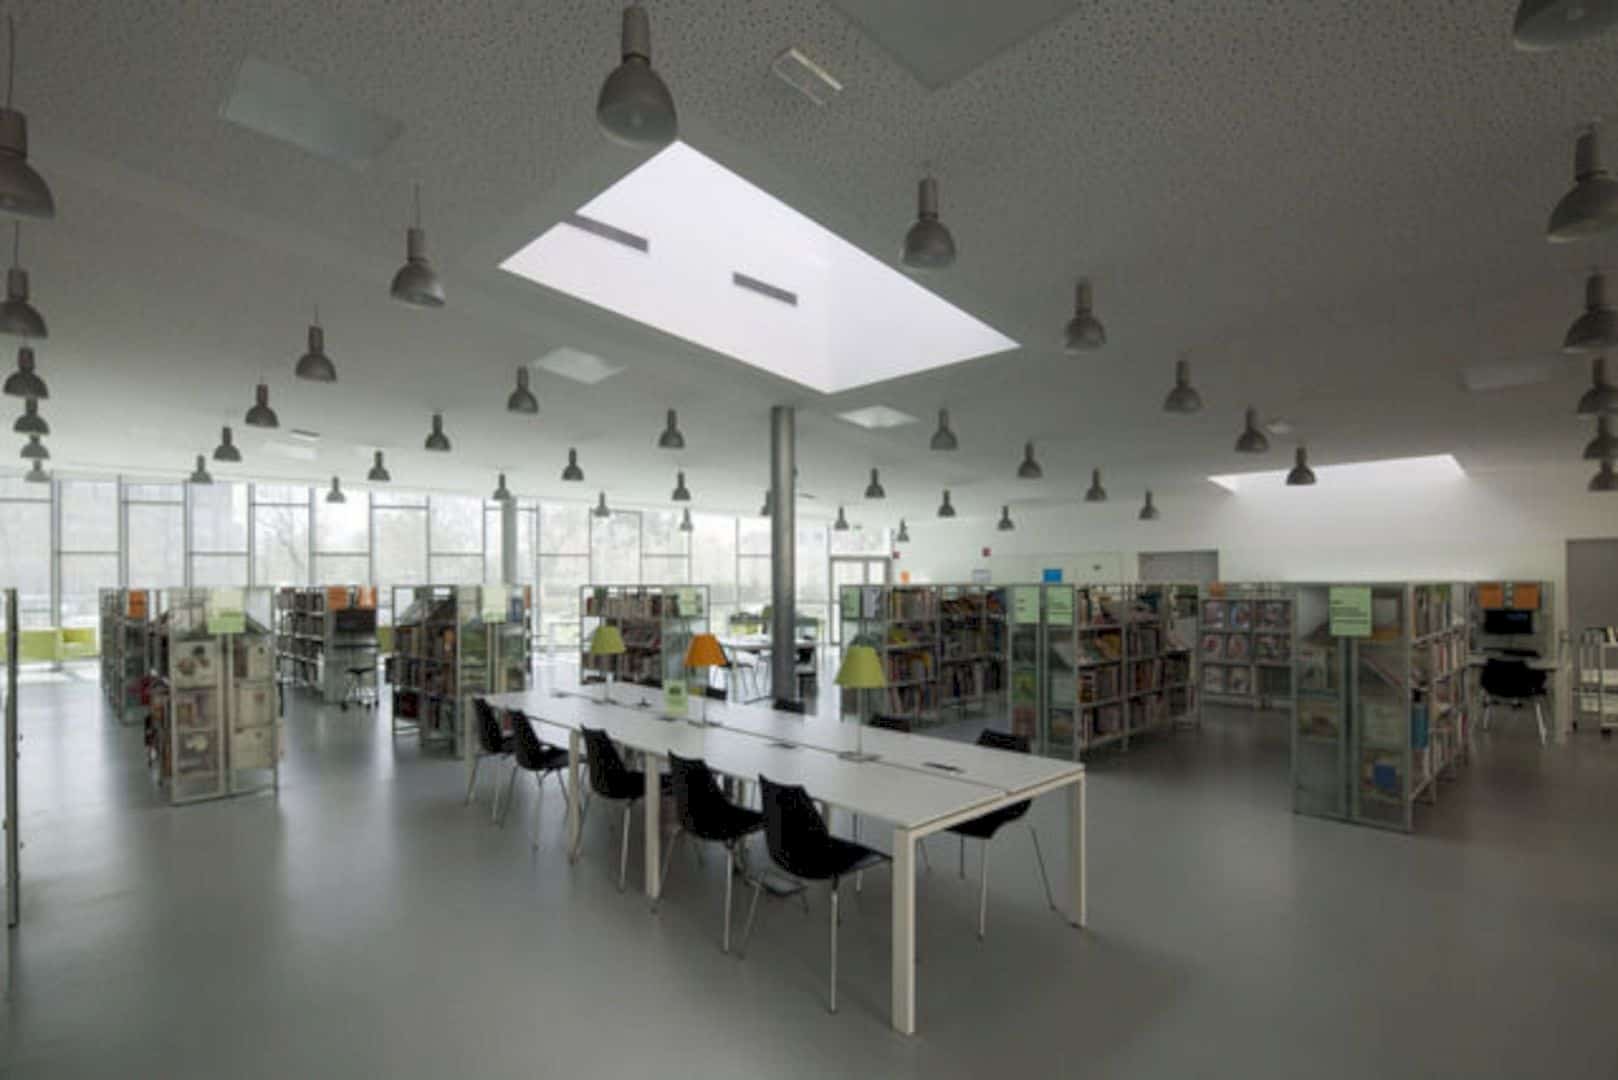 Lisses Media Library And Culture Center Reflecting Forces From Physical Social And Political Context 2